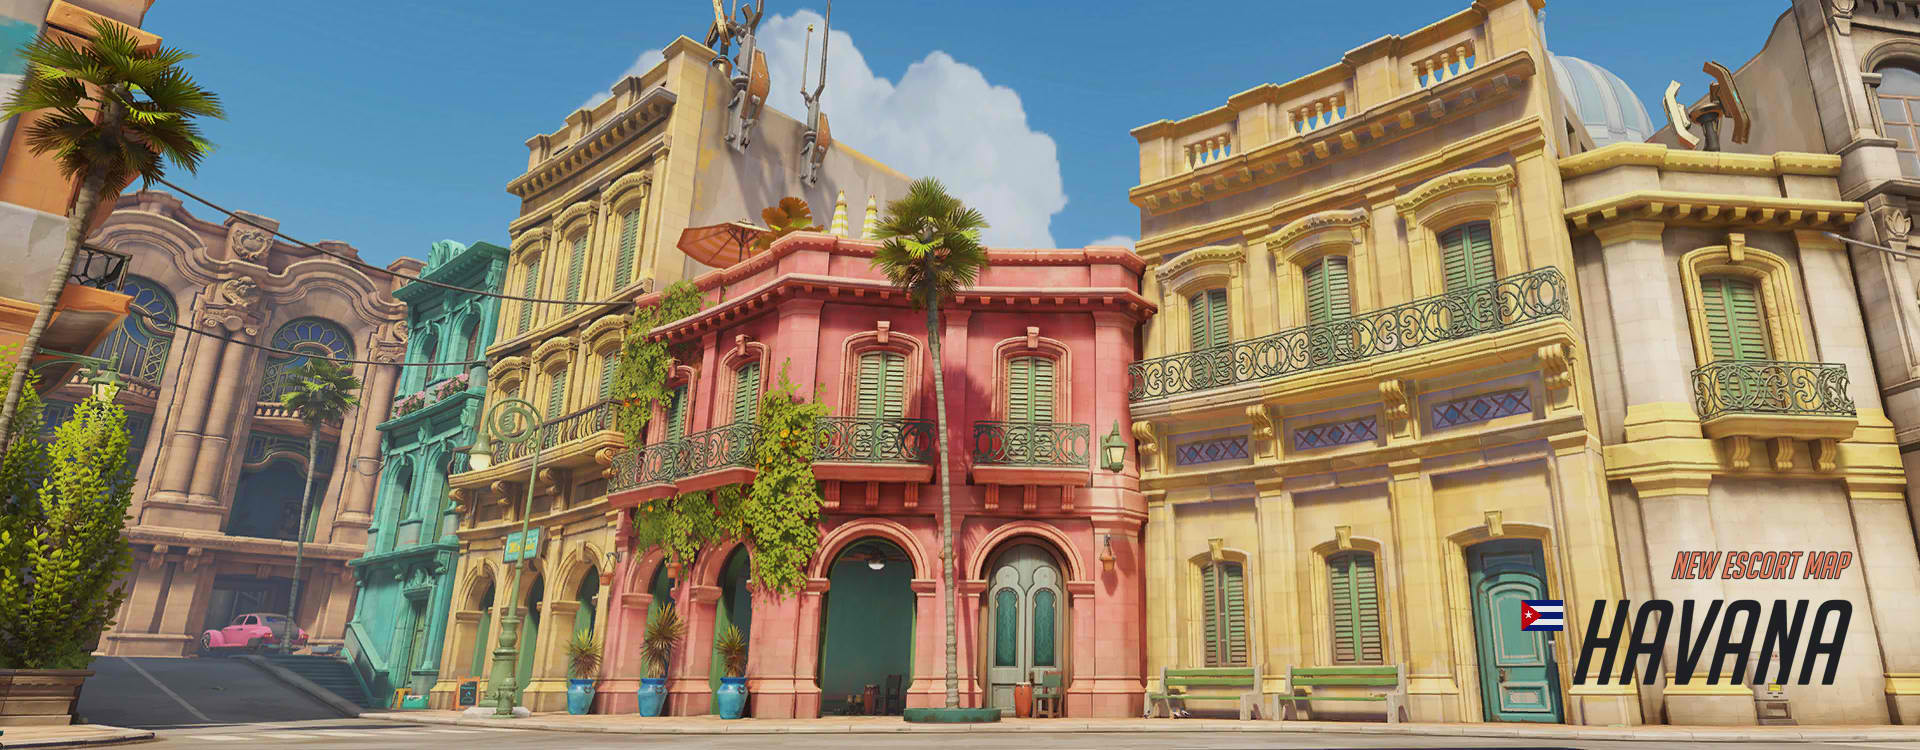 Overwatch Map Havana Can Now Be Accessed On Public Test Region; Test Expected To Last For 2-3 Weeks Before Going Live